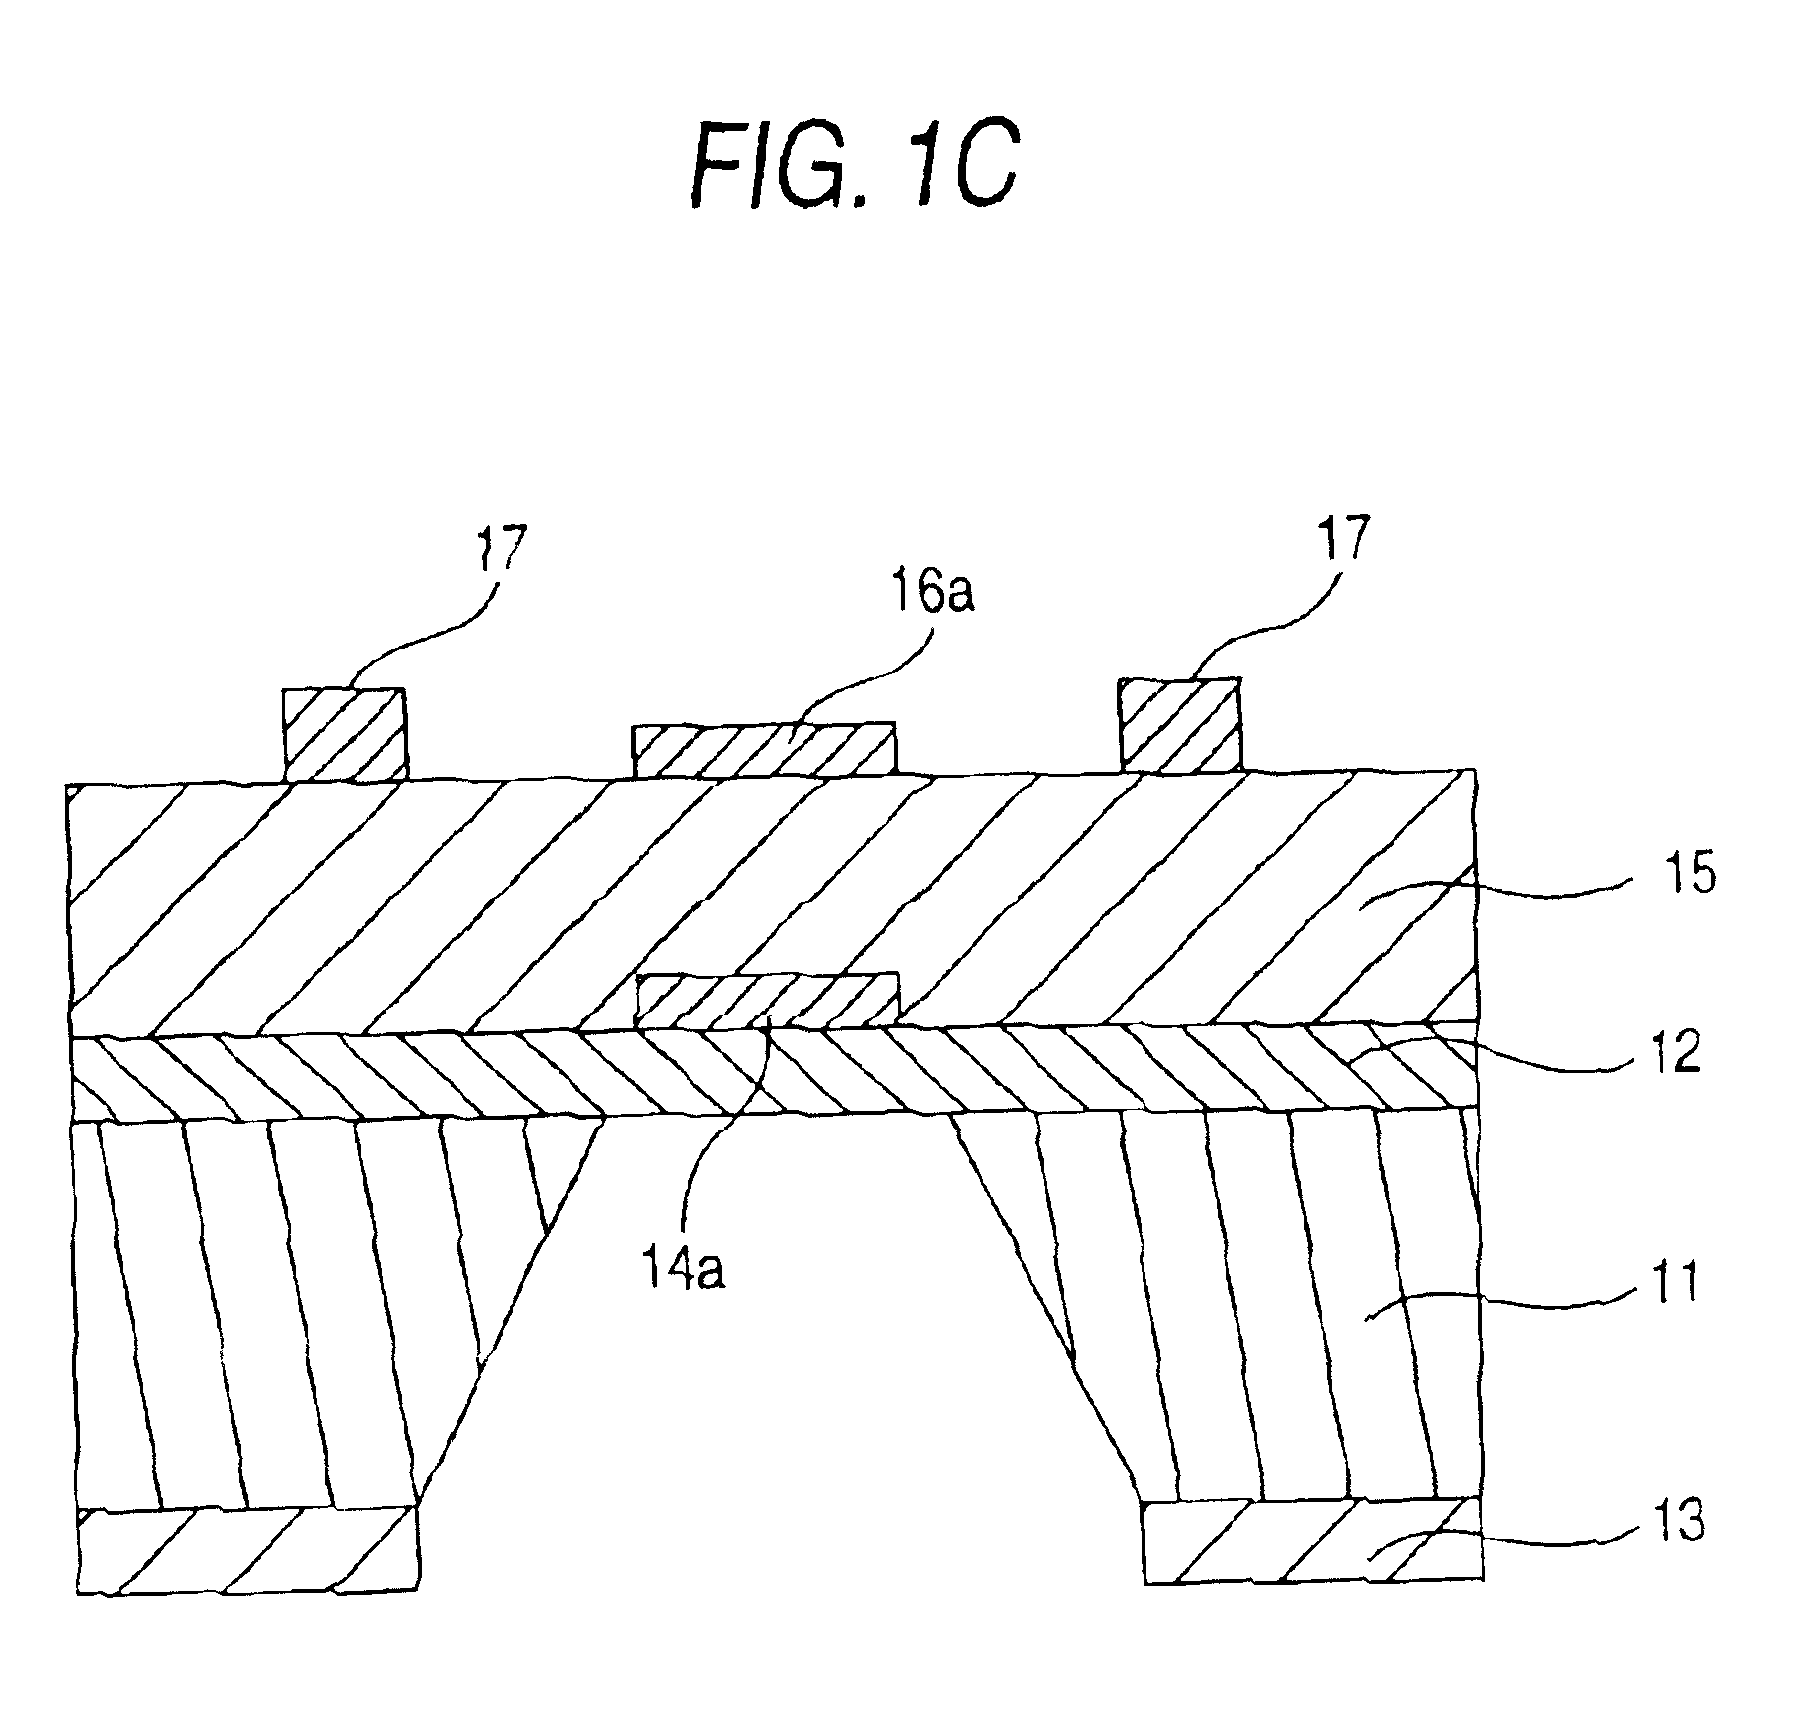 Thin-film piezoelectric resonator and method for fabricating the same